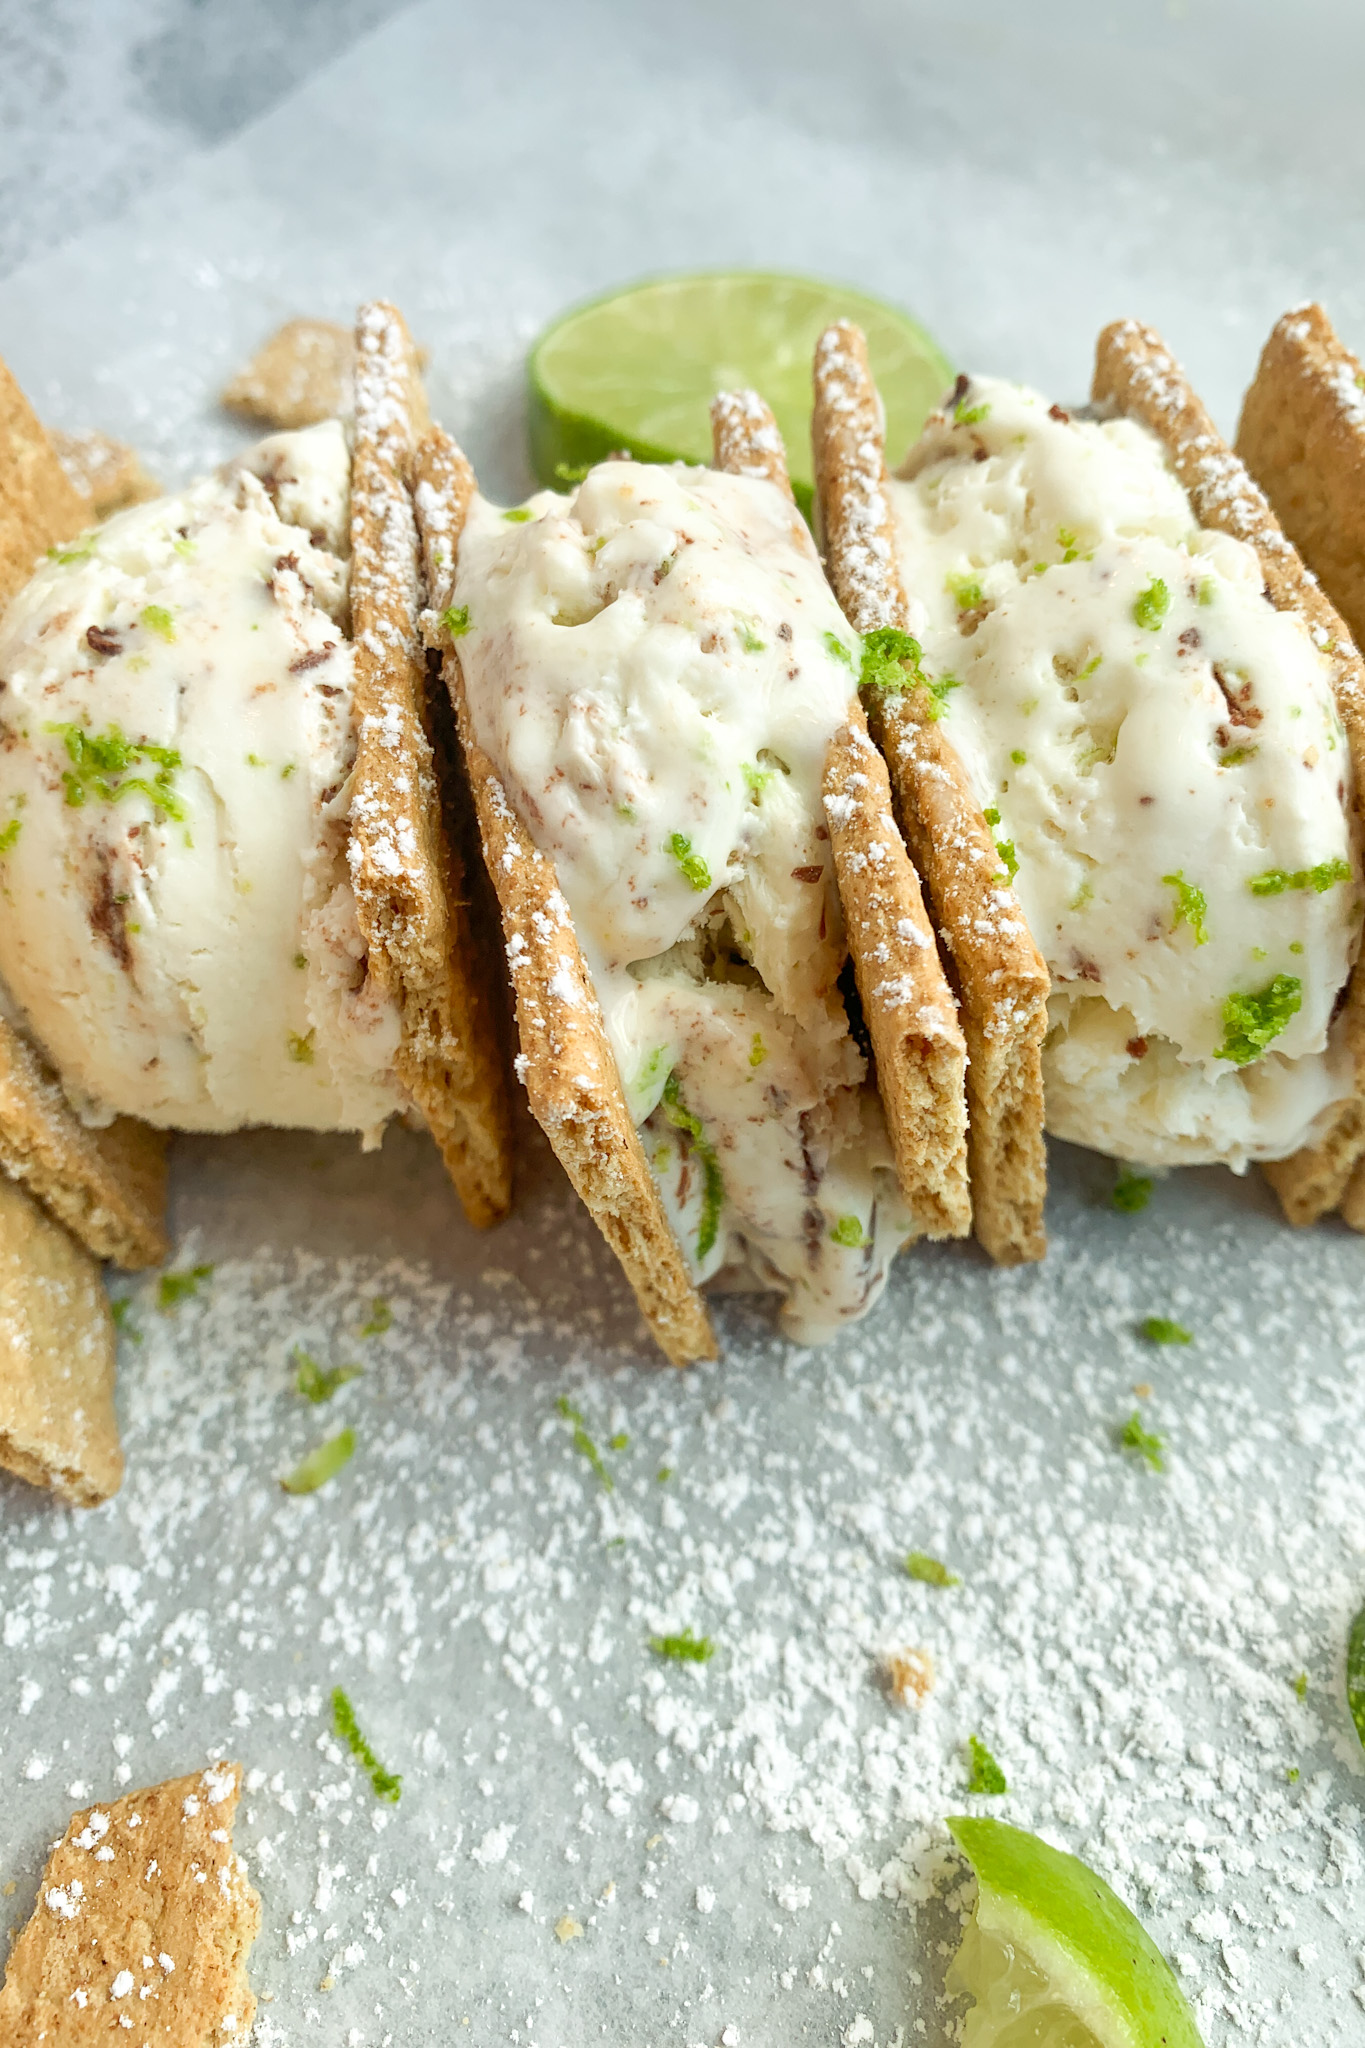 Key Lime Pie Ice Cream Sandwiches The Big Booty Baker